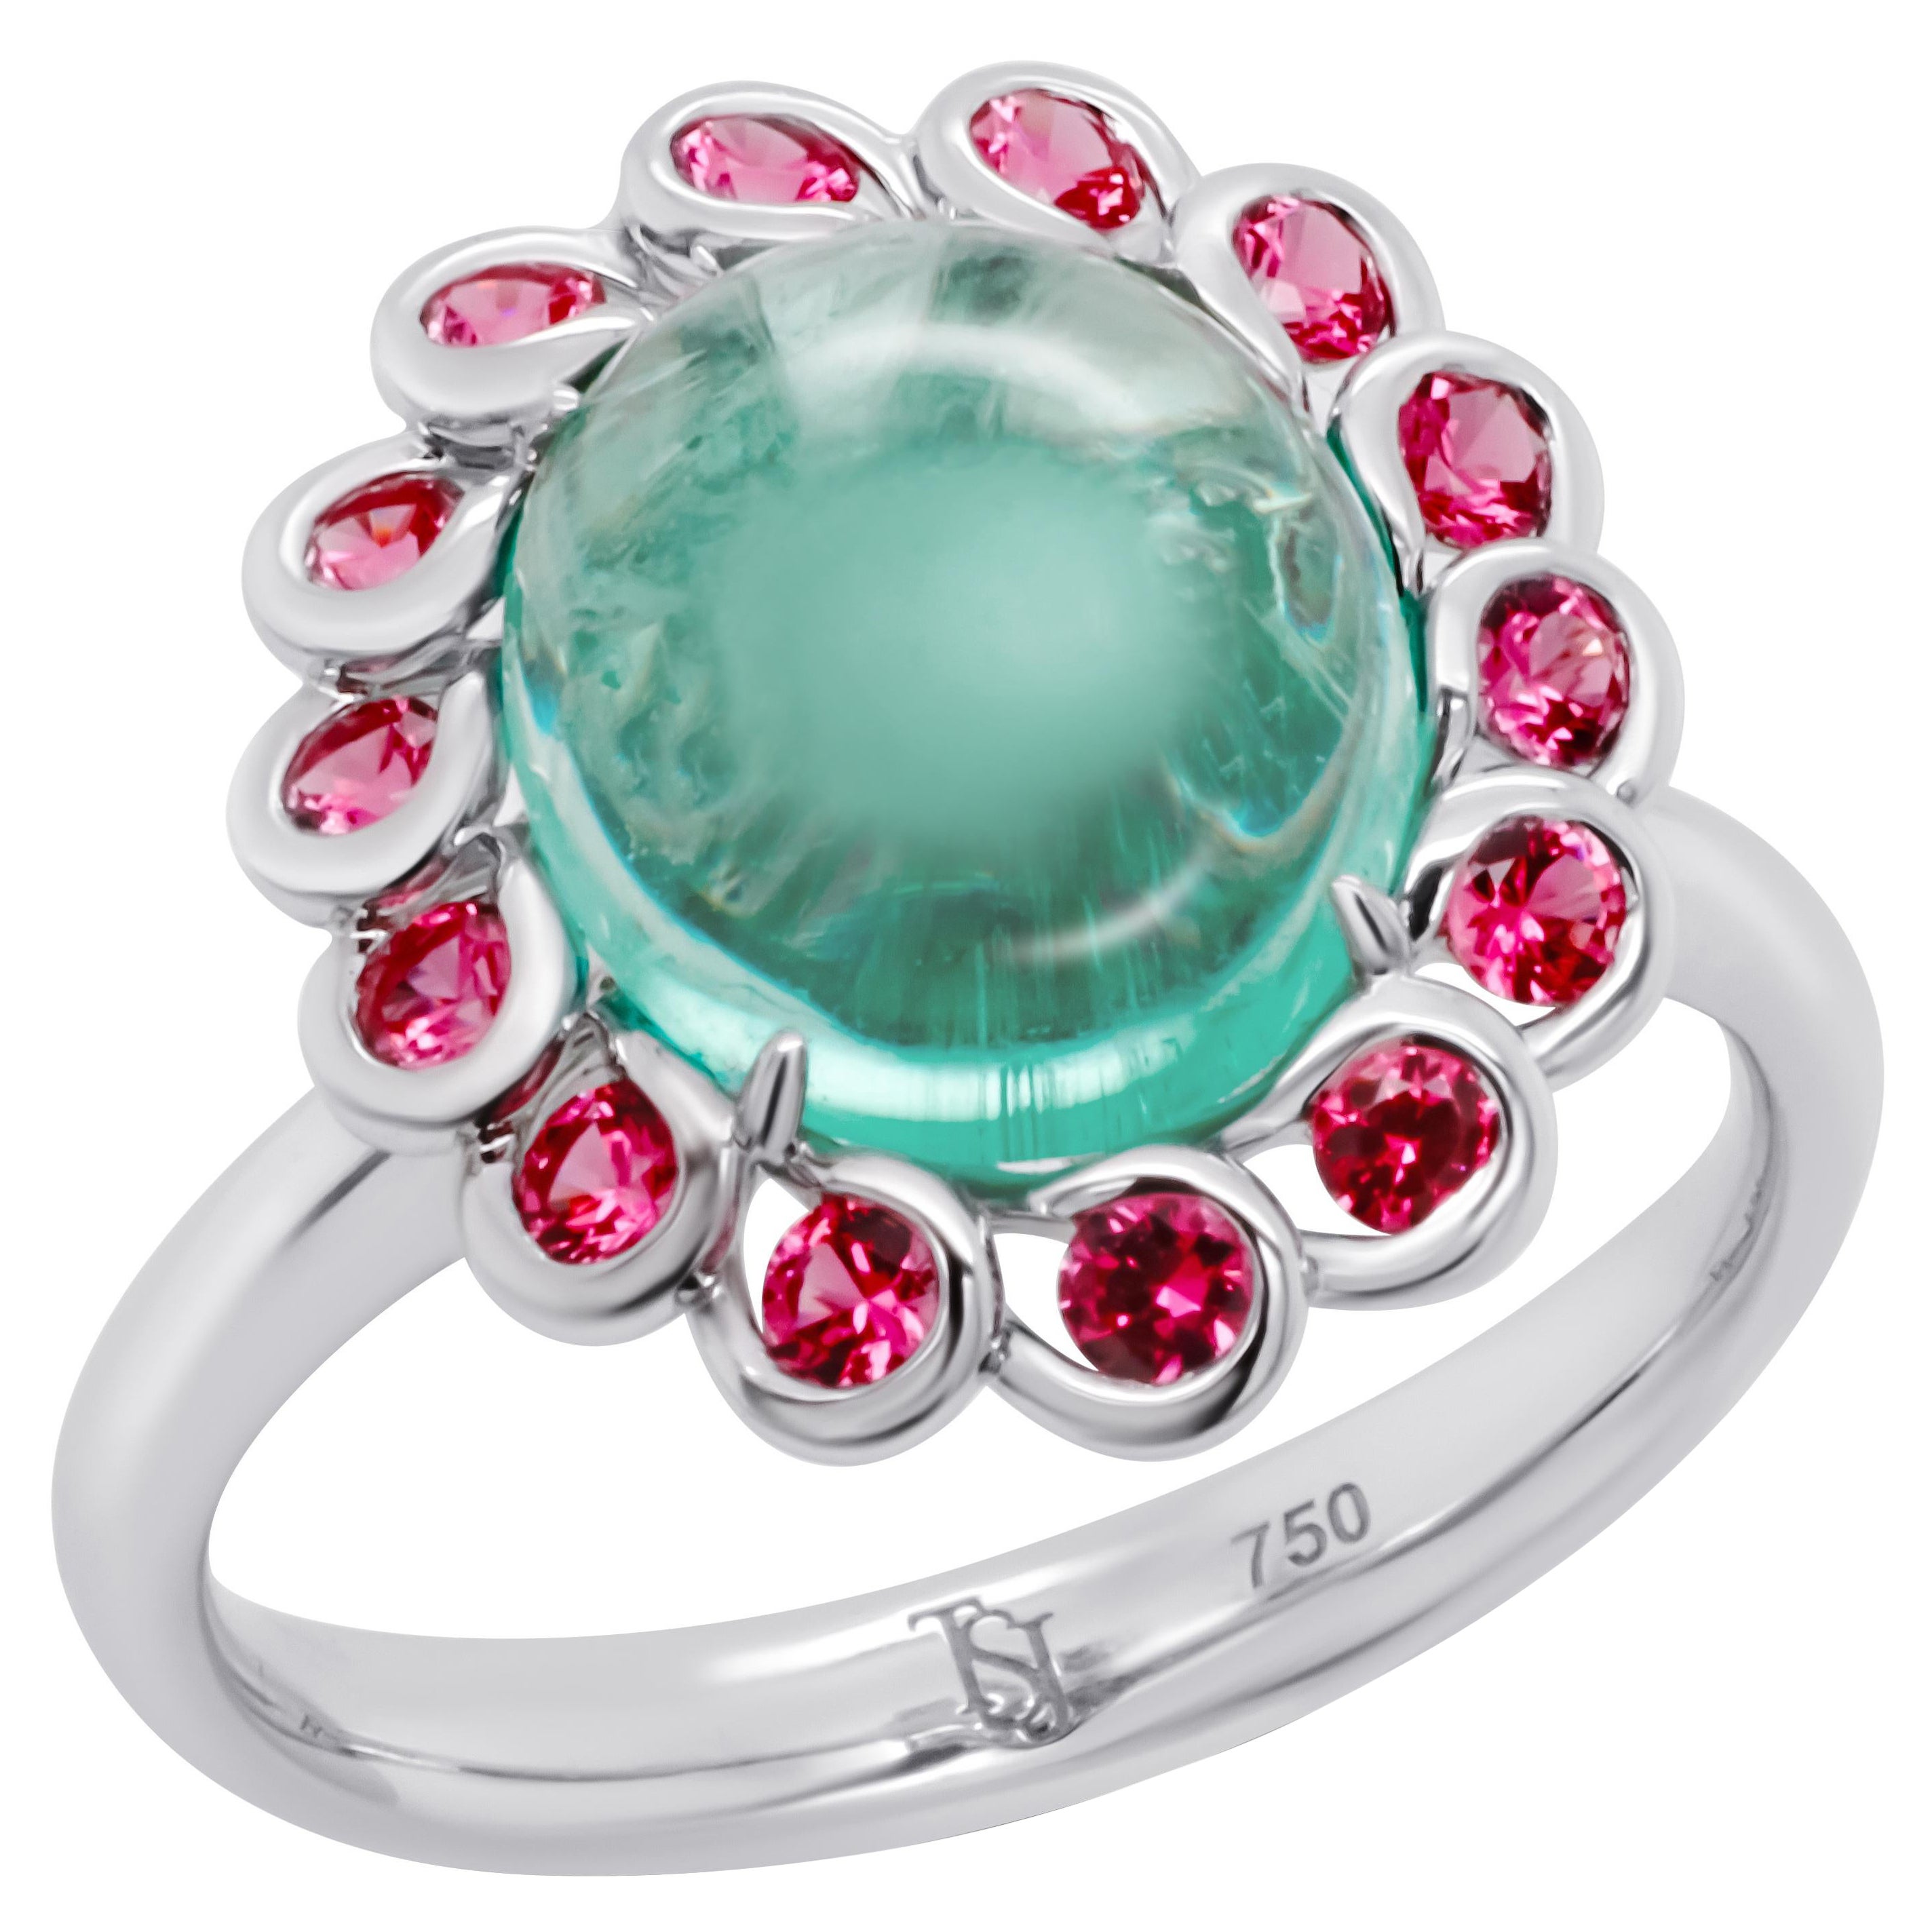 3.74 Ct Russian Emerald Cabochon and Spinel 18K Gold Ring